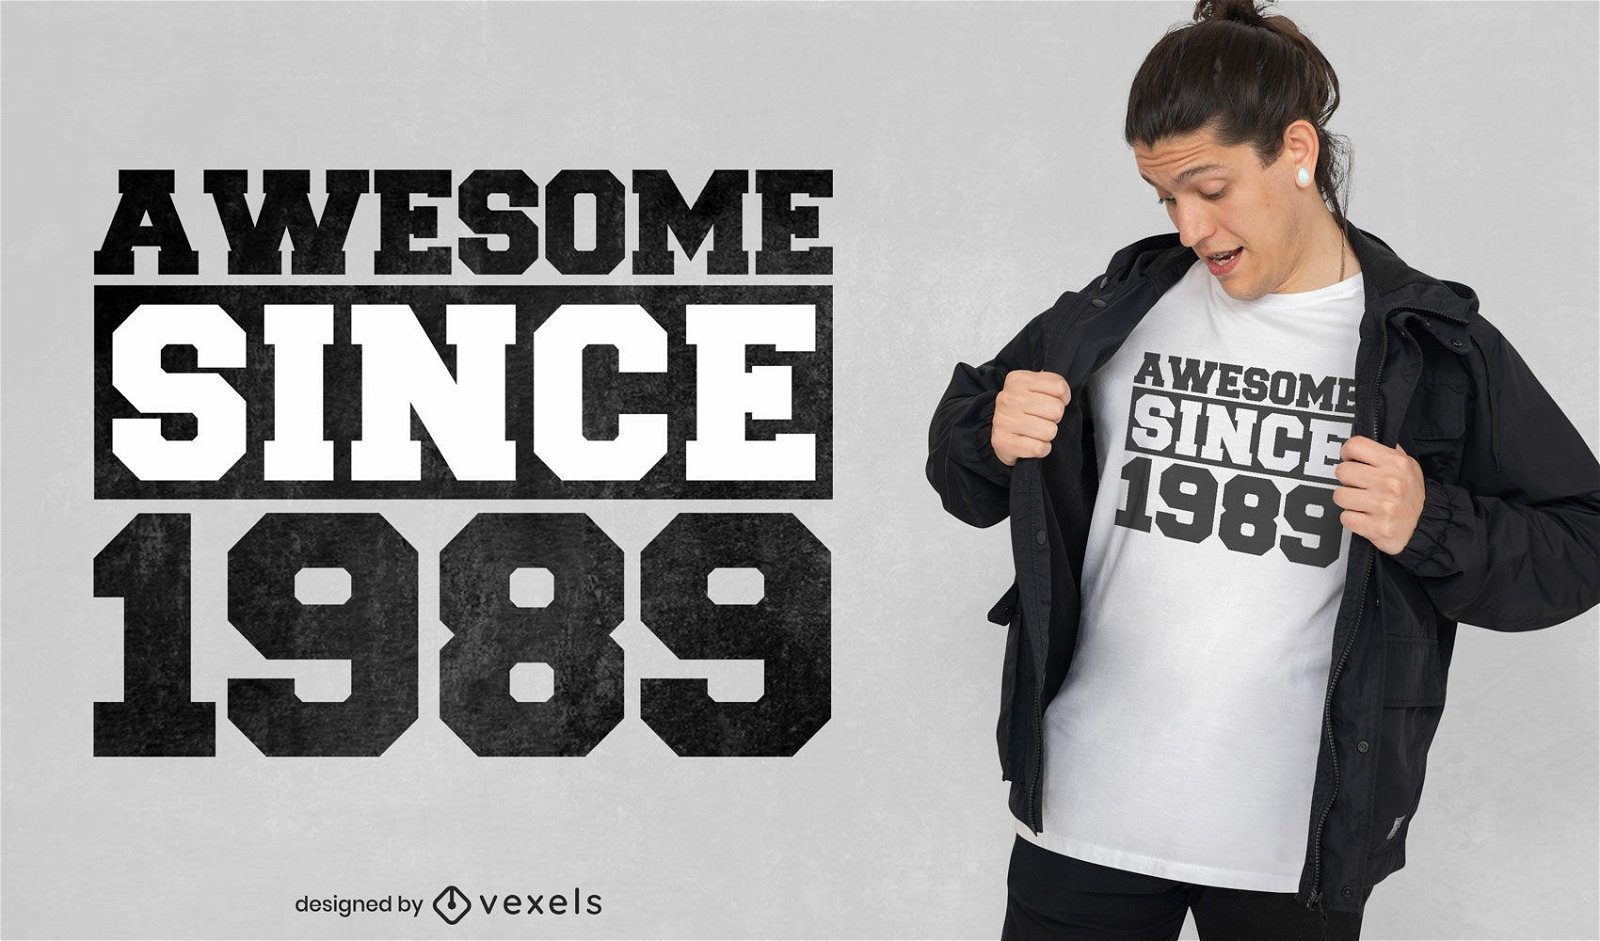 Awesome since 1989 quote t-shirt psd